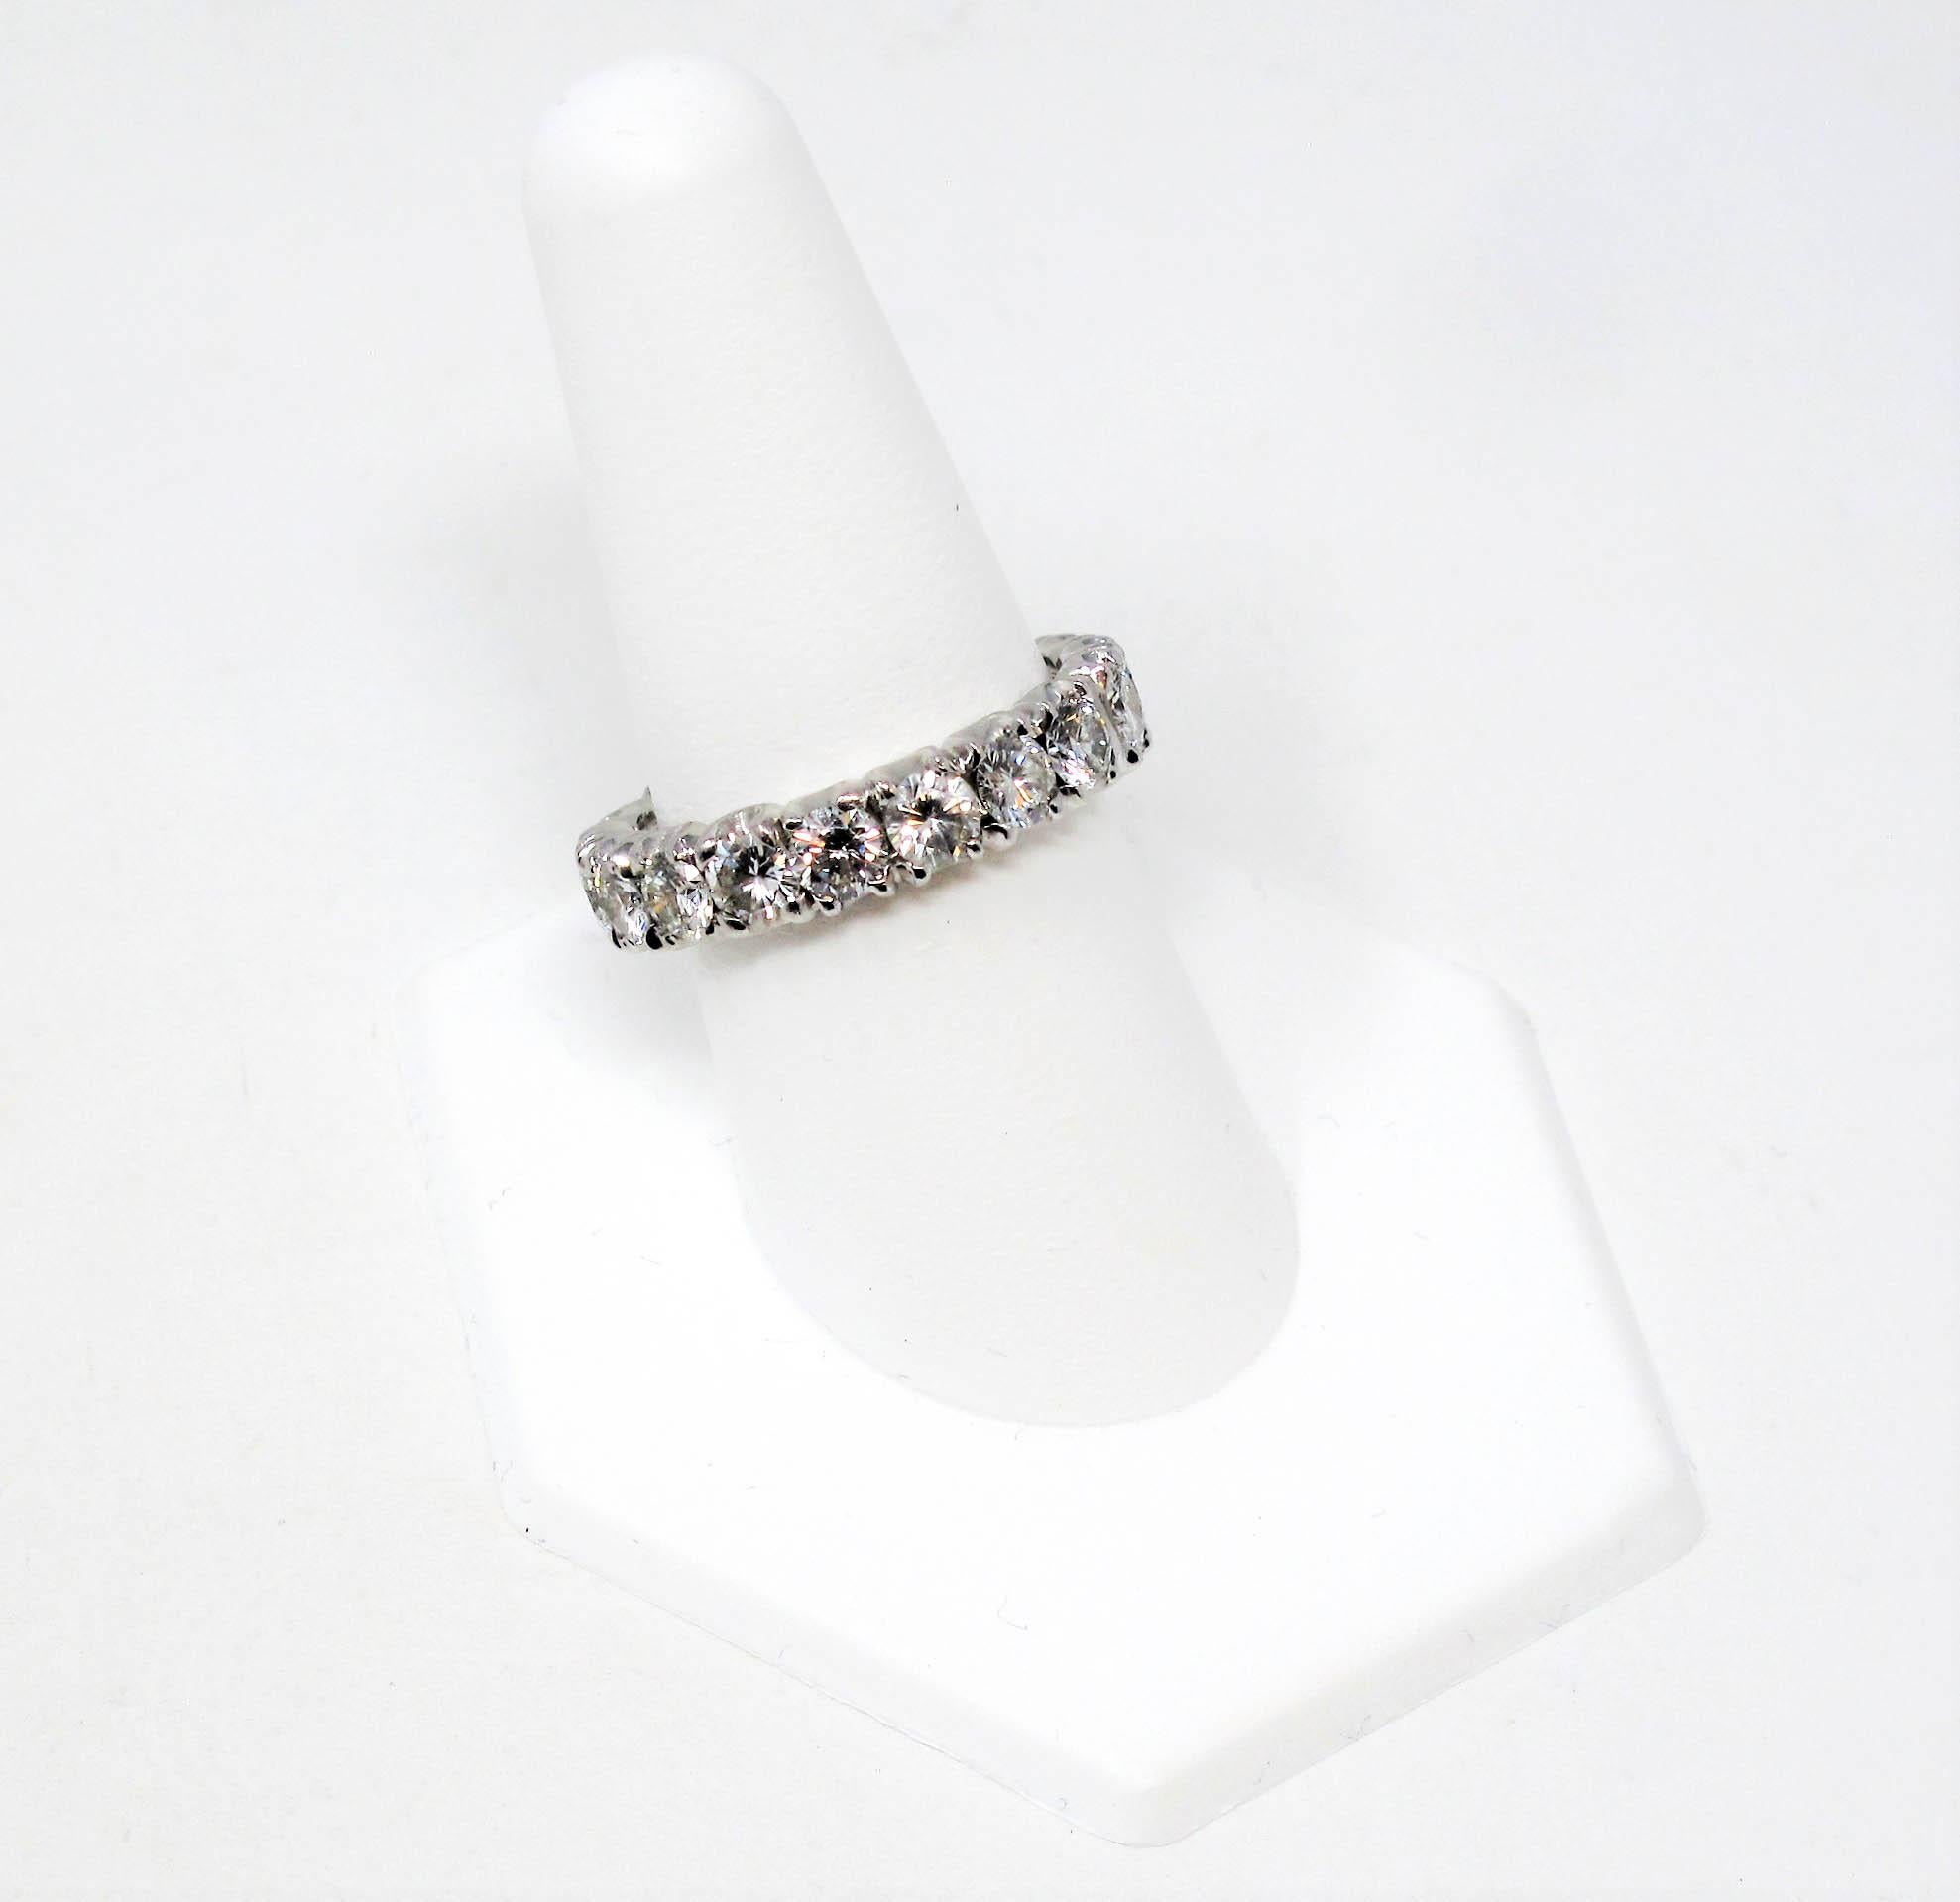 4.25 Carat Total Round Brilliant Diamond Eternity Band Ring in Platinum Size 9 For Sale 1